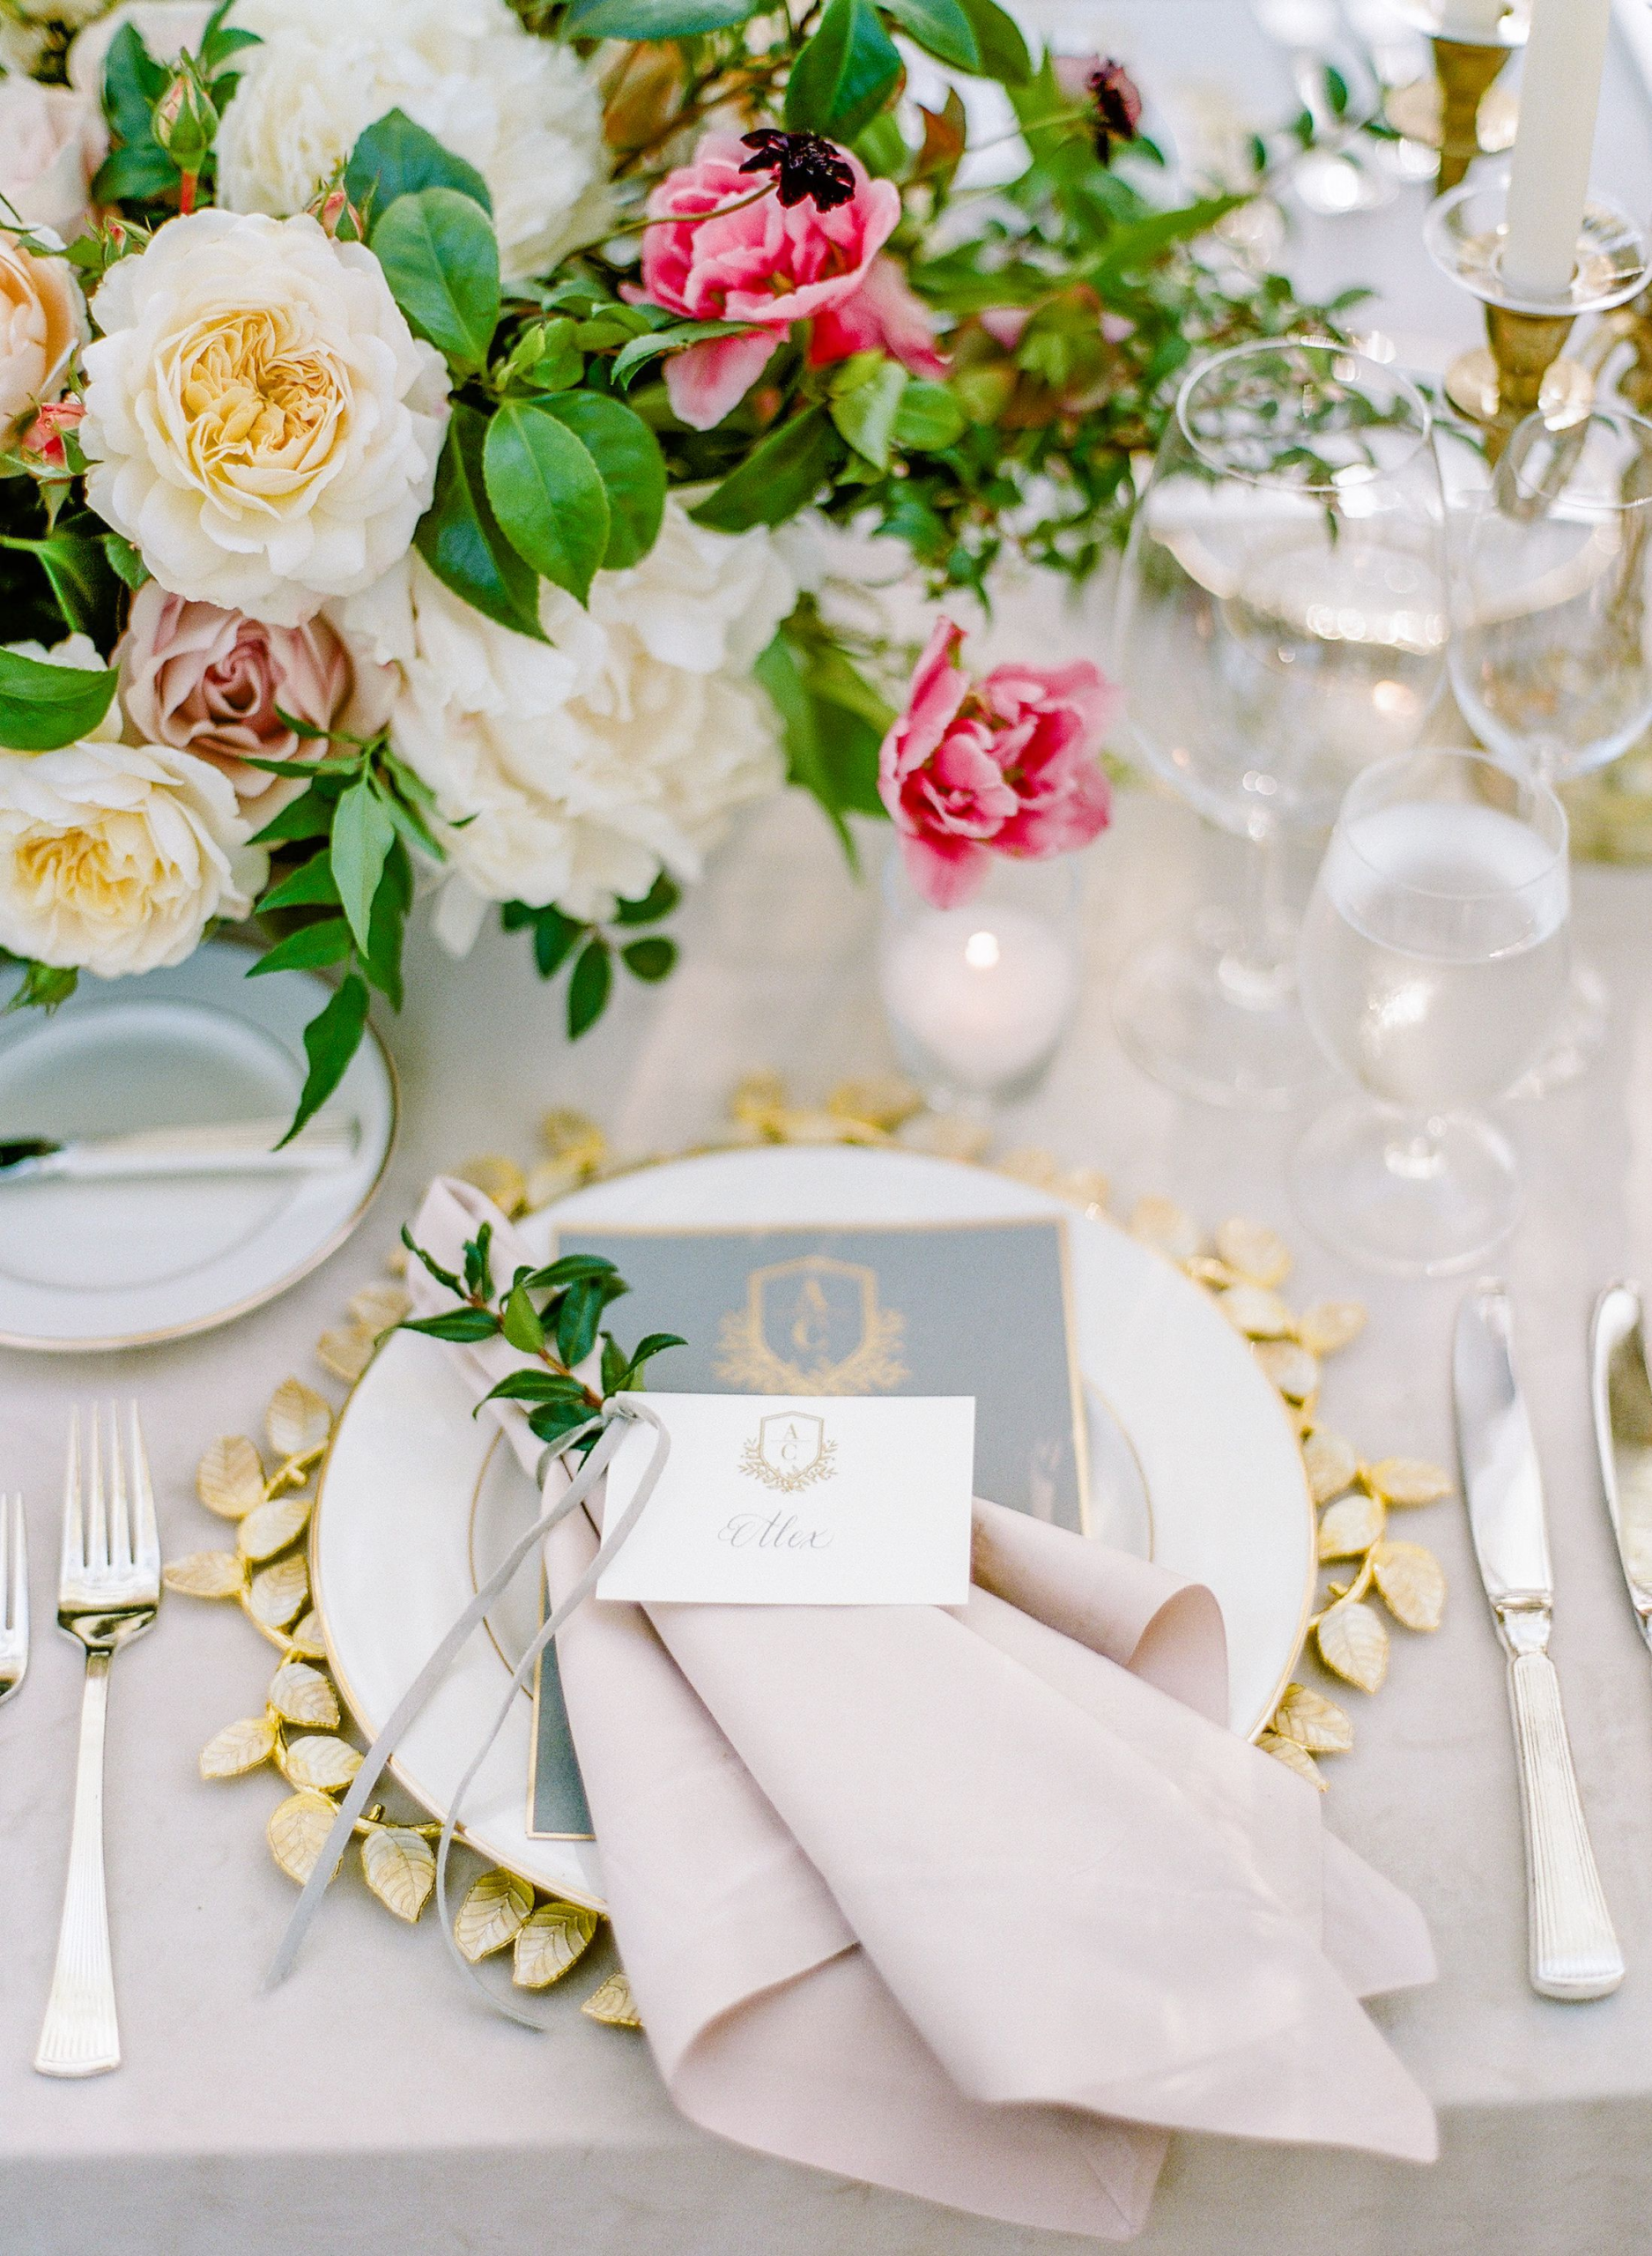 44 Lovely Place Settings to Inspire Your Wedding Reception Tables - Brides.com 1